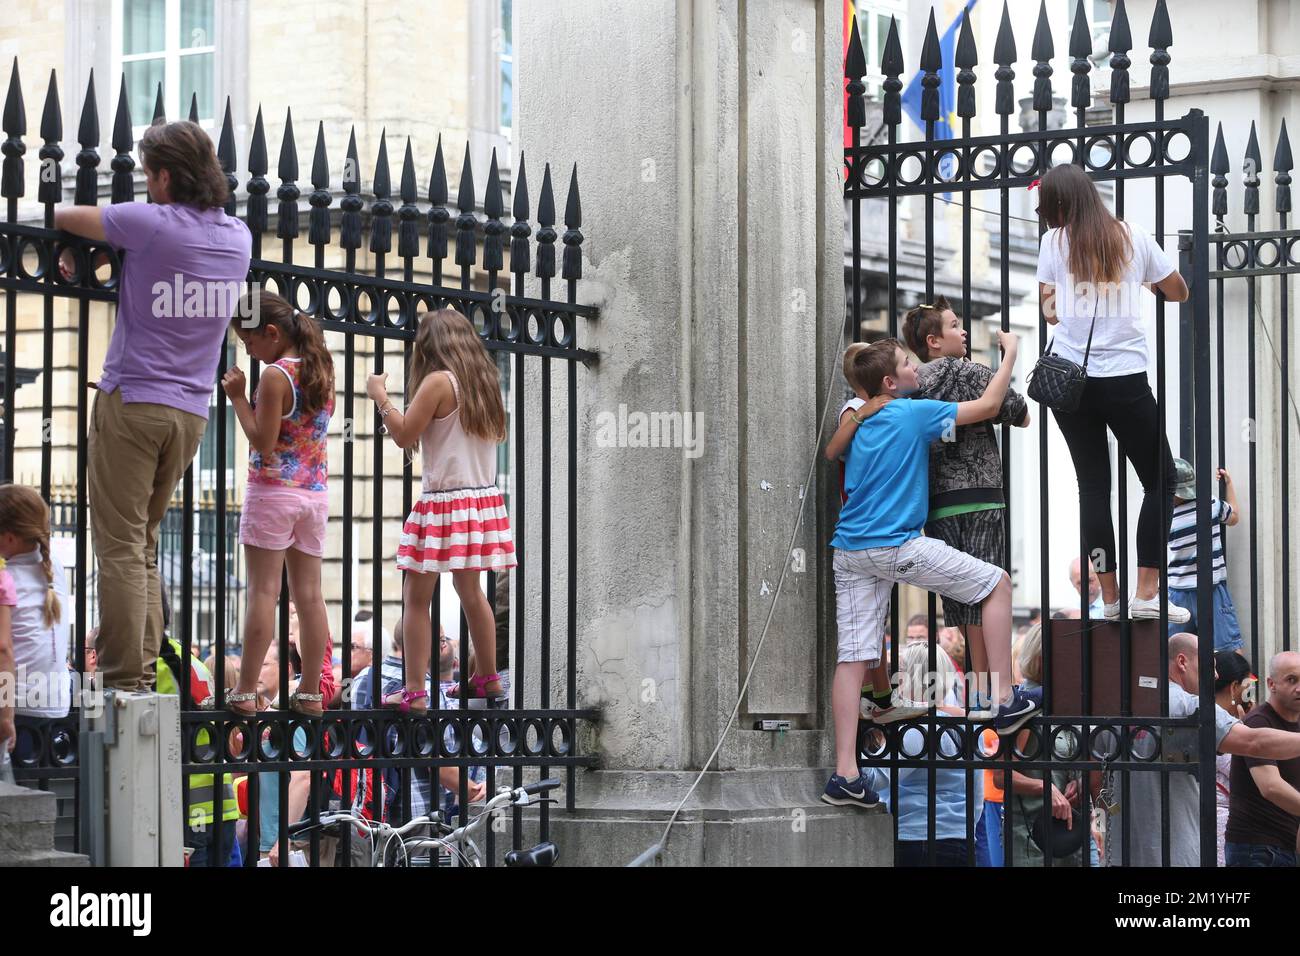 Illustration picture shows children climbing fences to watch the military parade on the Belgian National Day, Tuesday 21 July 2015 Stock Photo